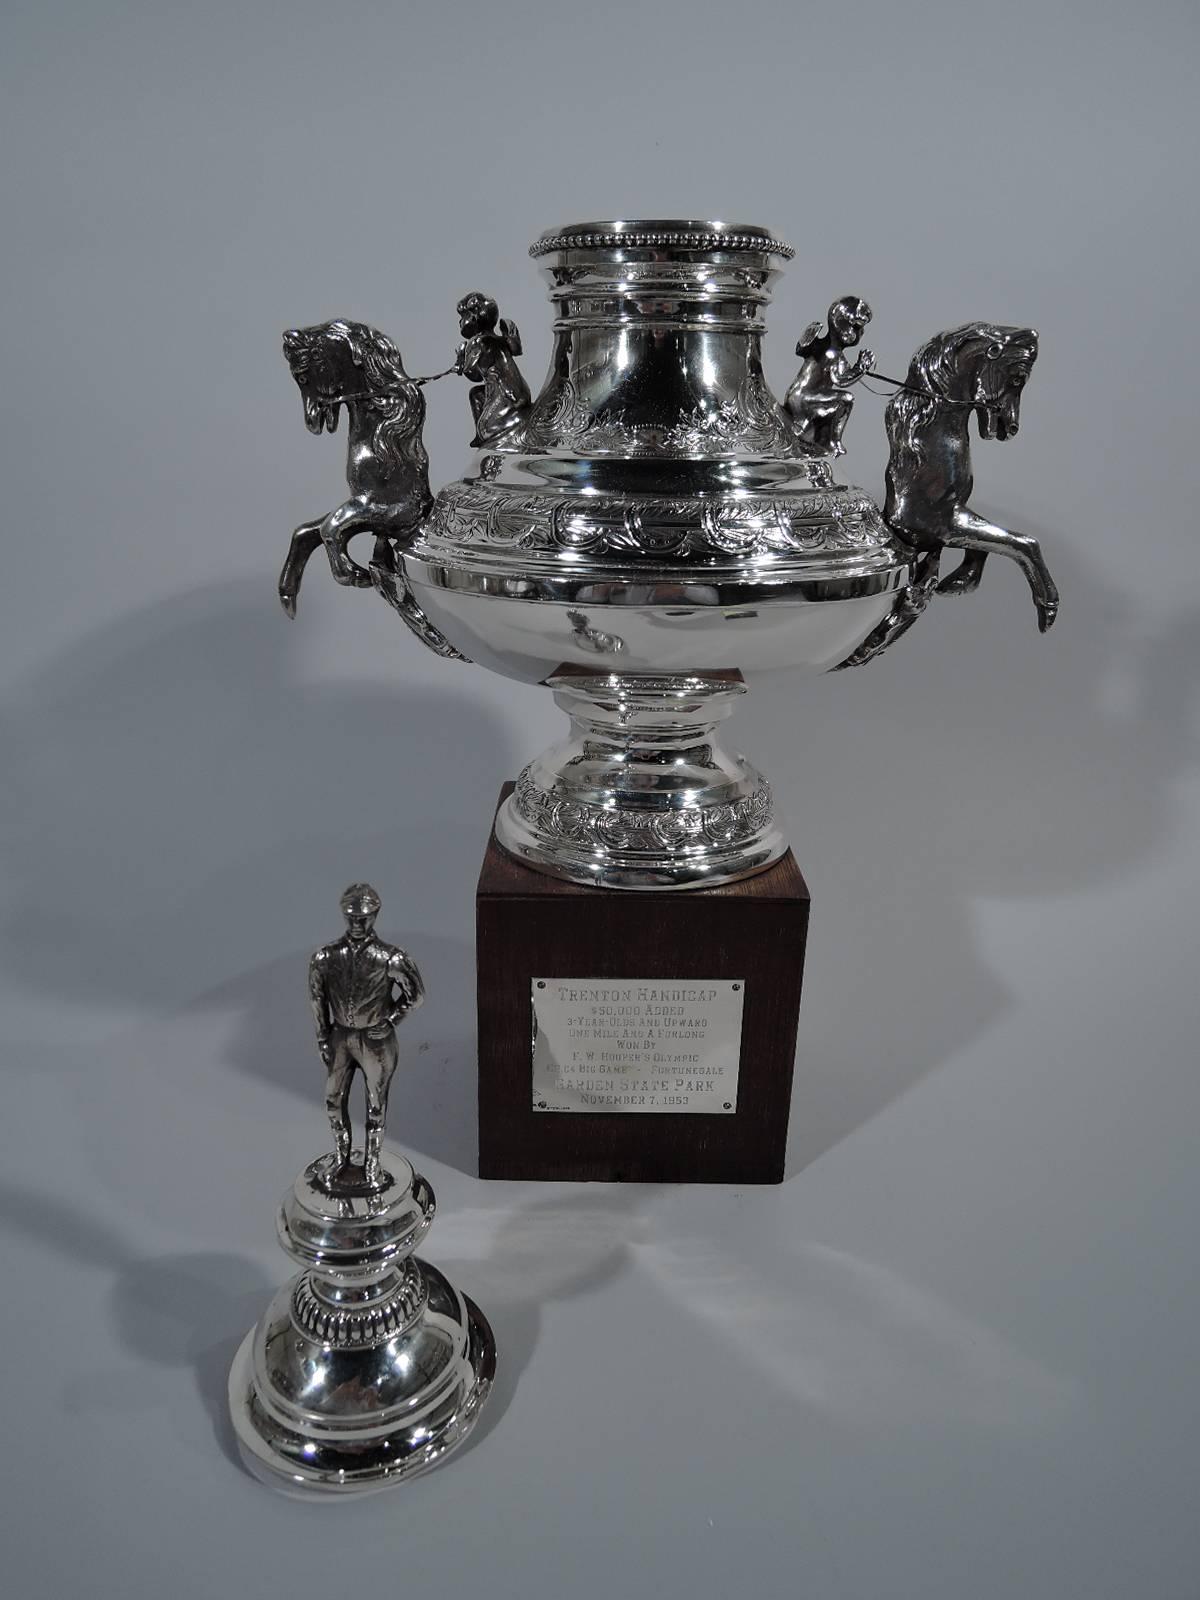 20th Century American Sterling Silver Horse Trophy with Jockey Finial